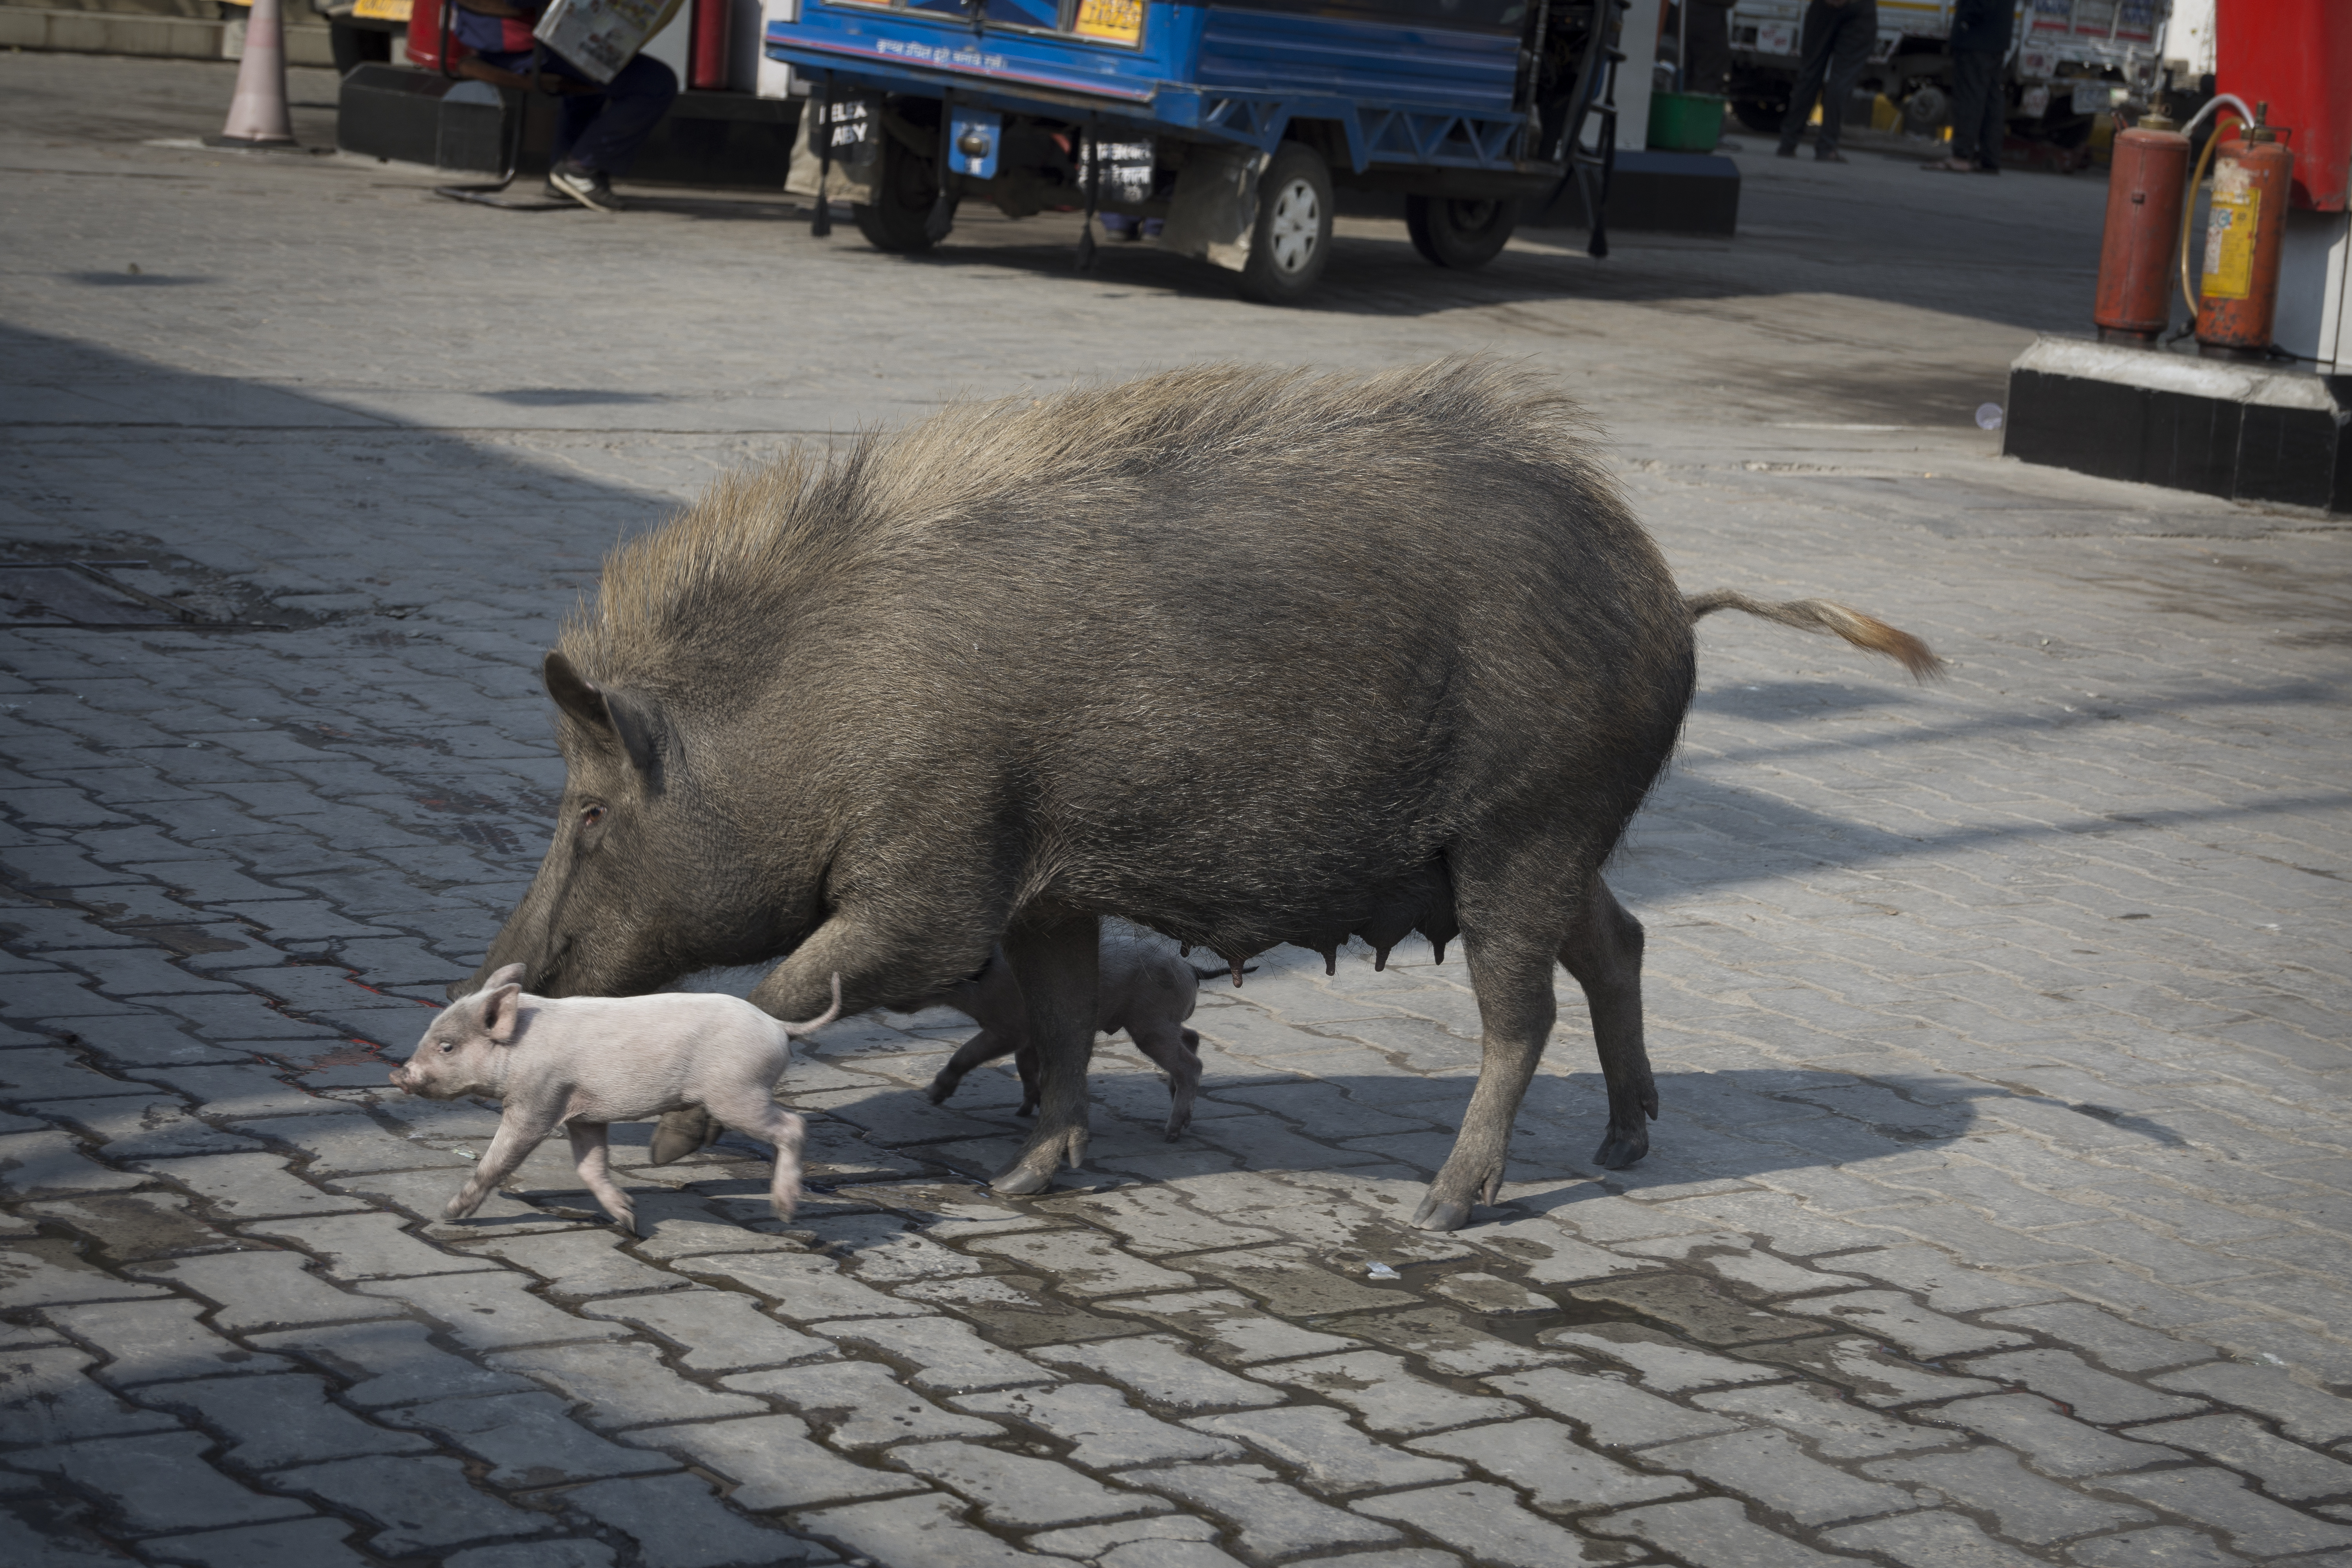 sow and her piglets run across a street in a city in India